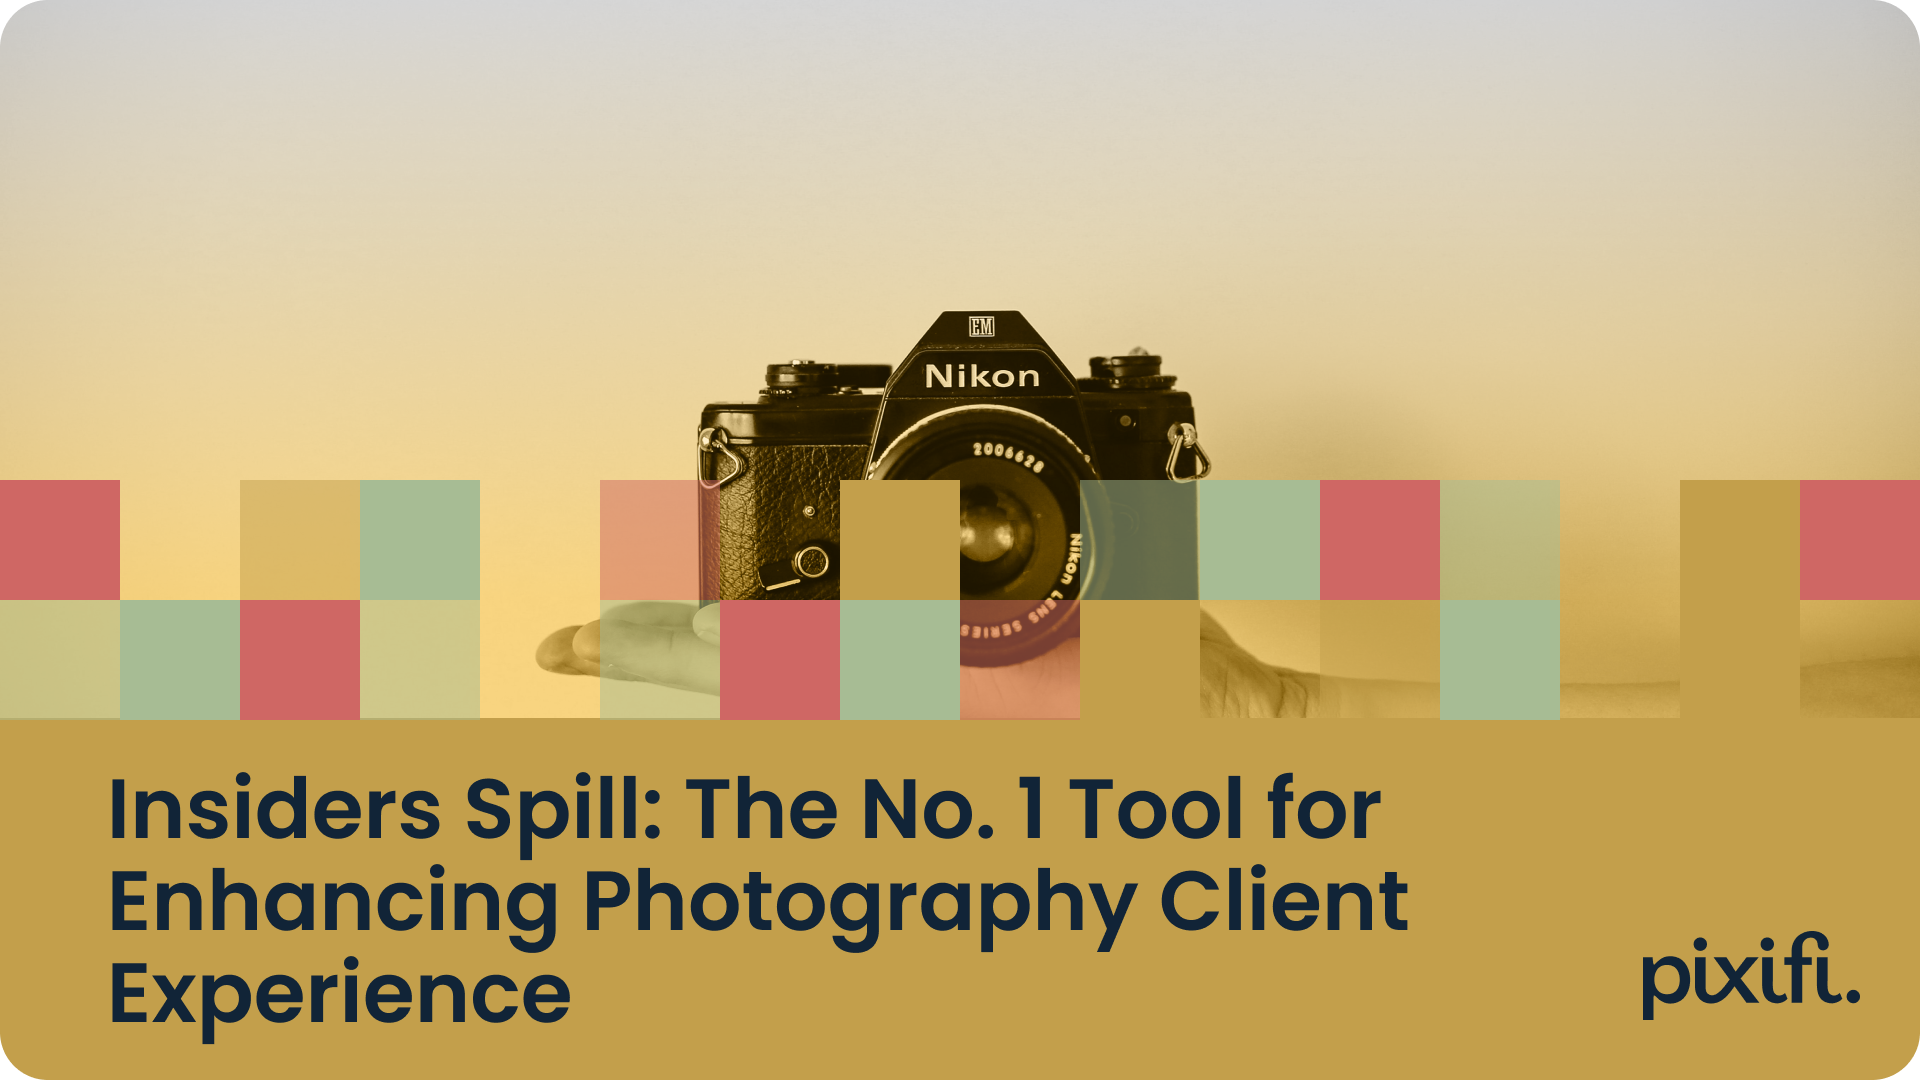 Insiders Spill: The No. 1 Tool for Enhancing Photography Client Experience!